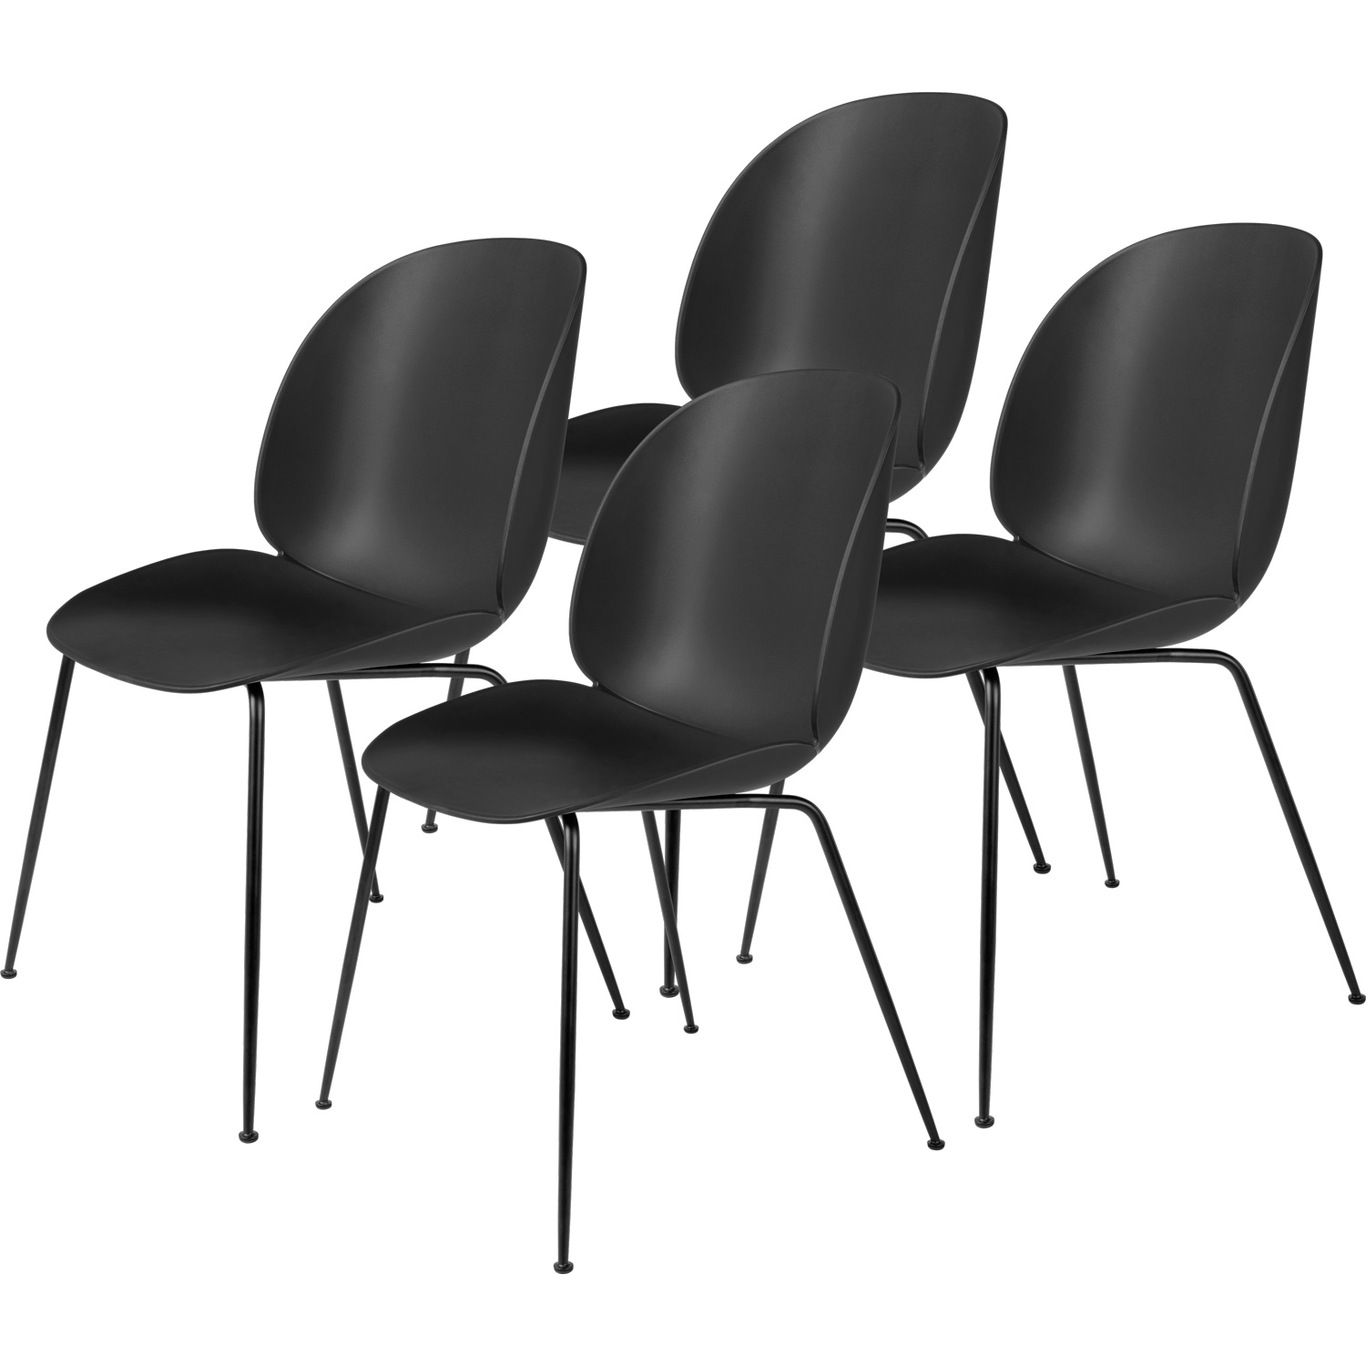 Beetle Dining Chair Unupholstered, Conic Base Black, Set Of 4, Black